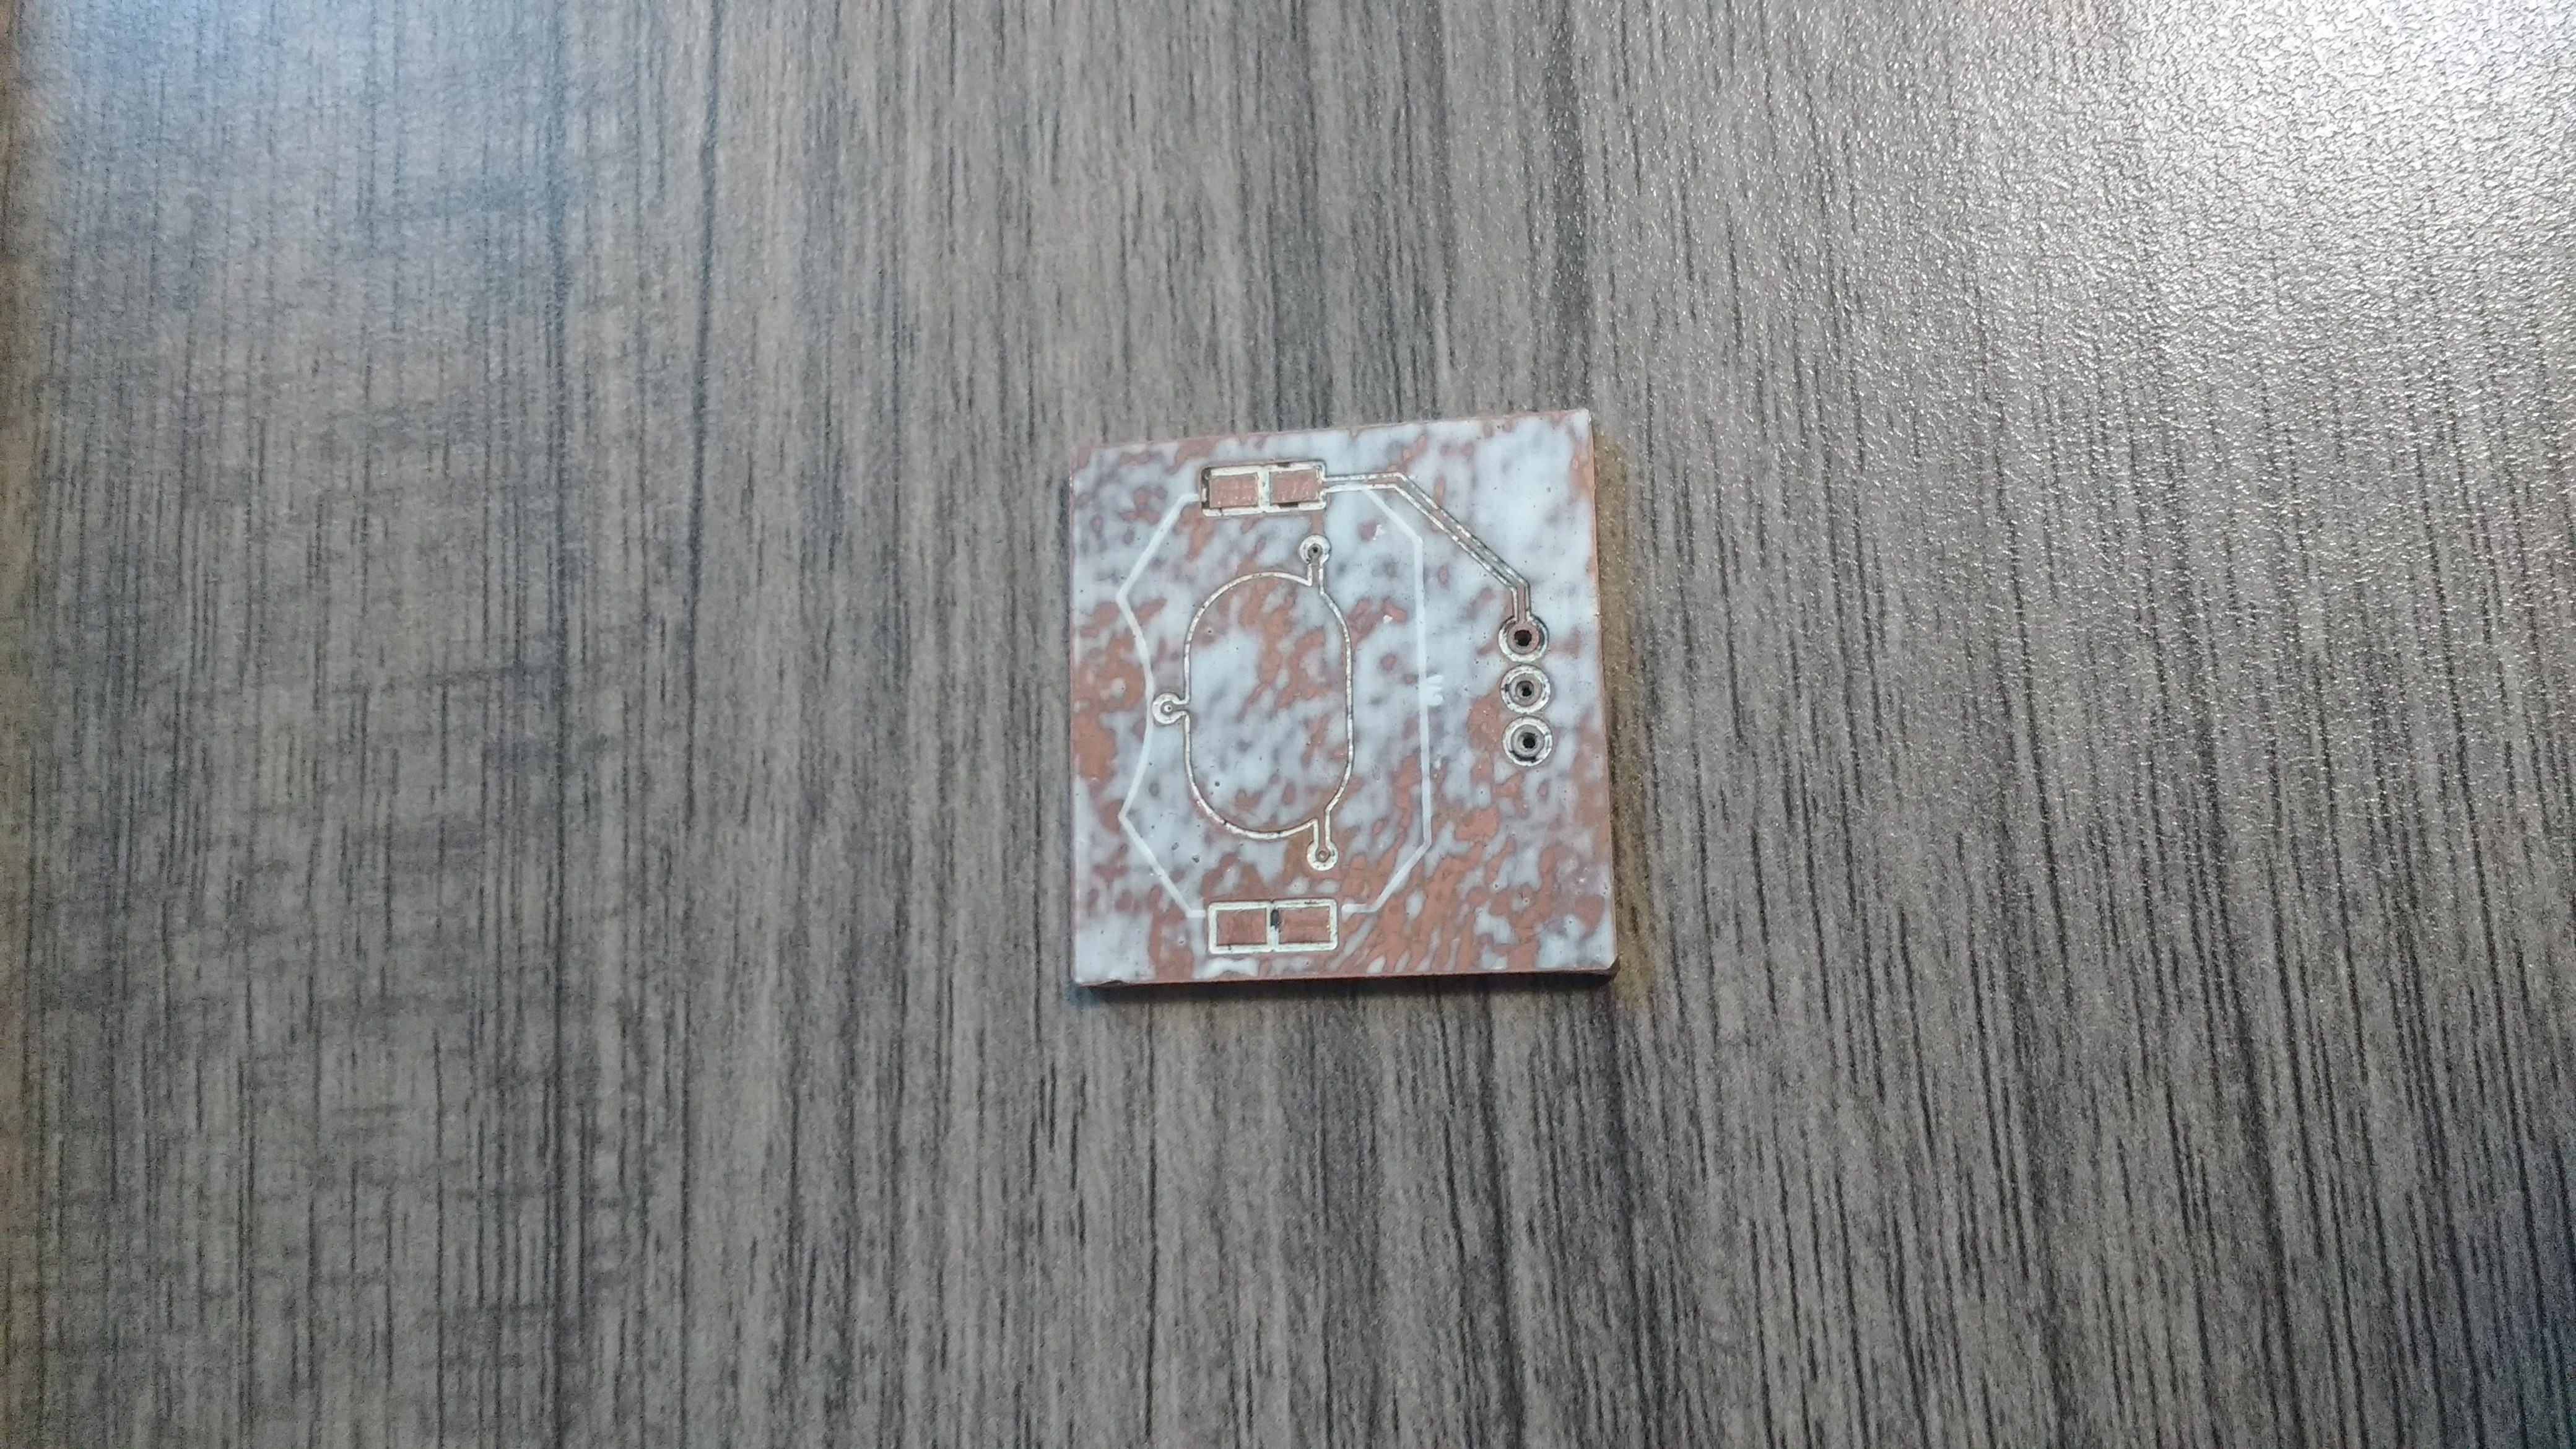 the bottom a 1 inch by 1 inch  copper PCB, with white paint covering its surface.  It has pads for a battery holder